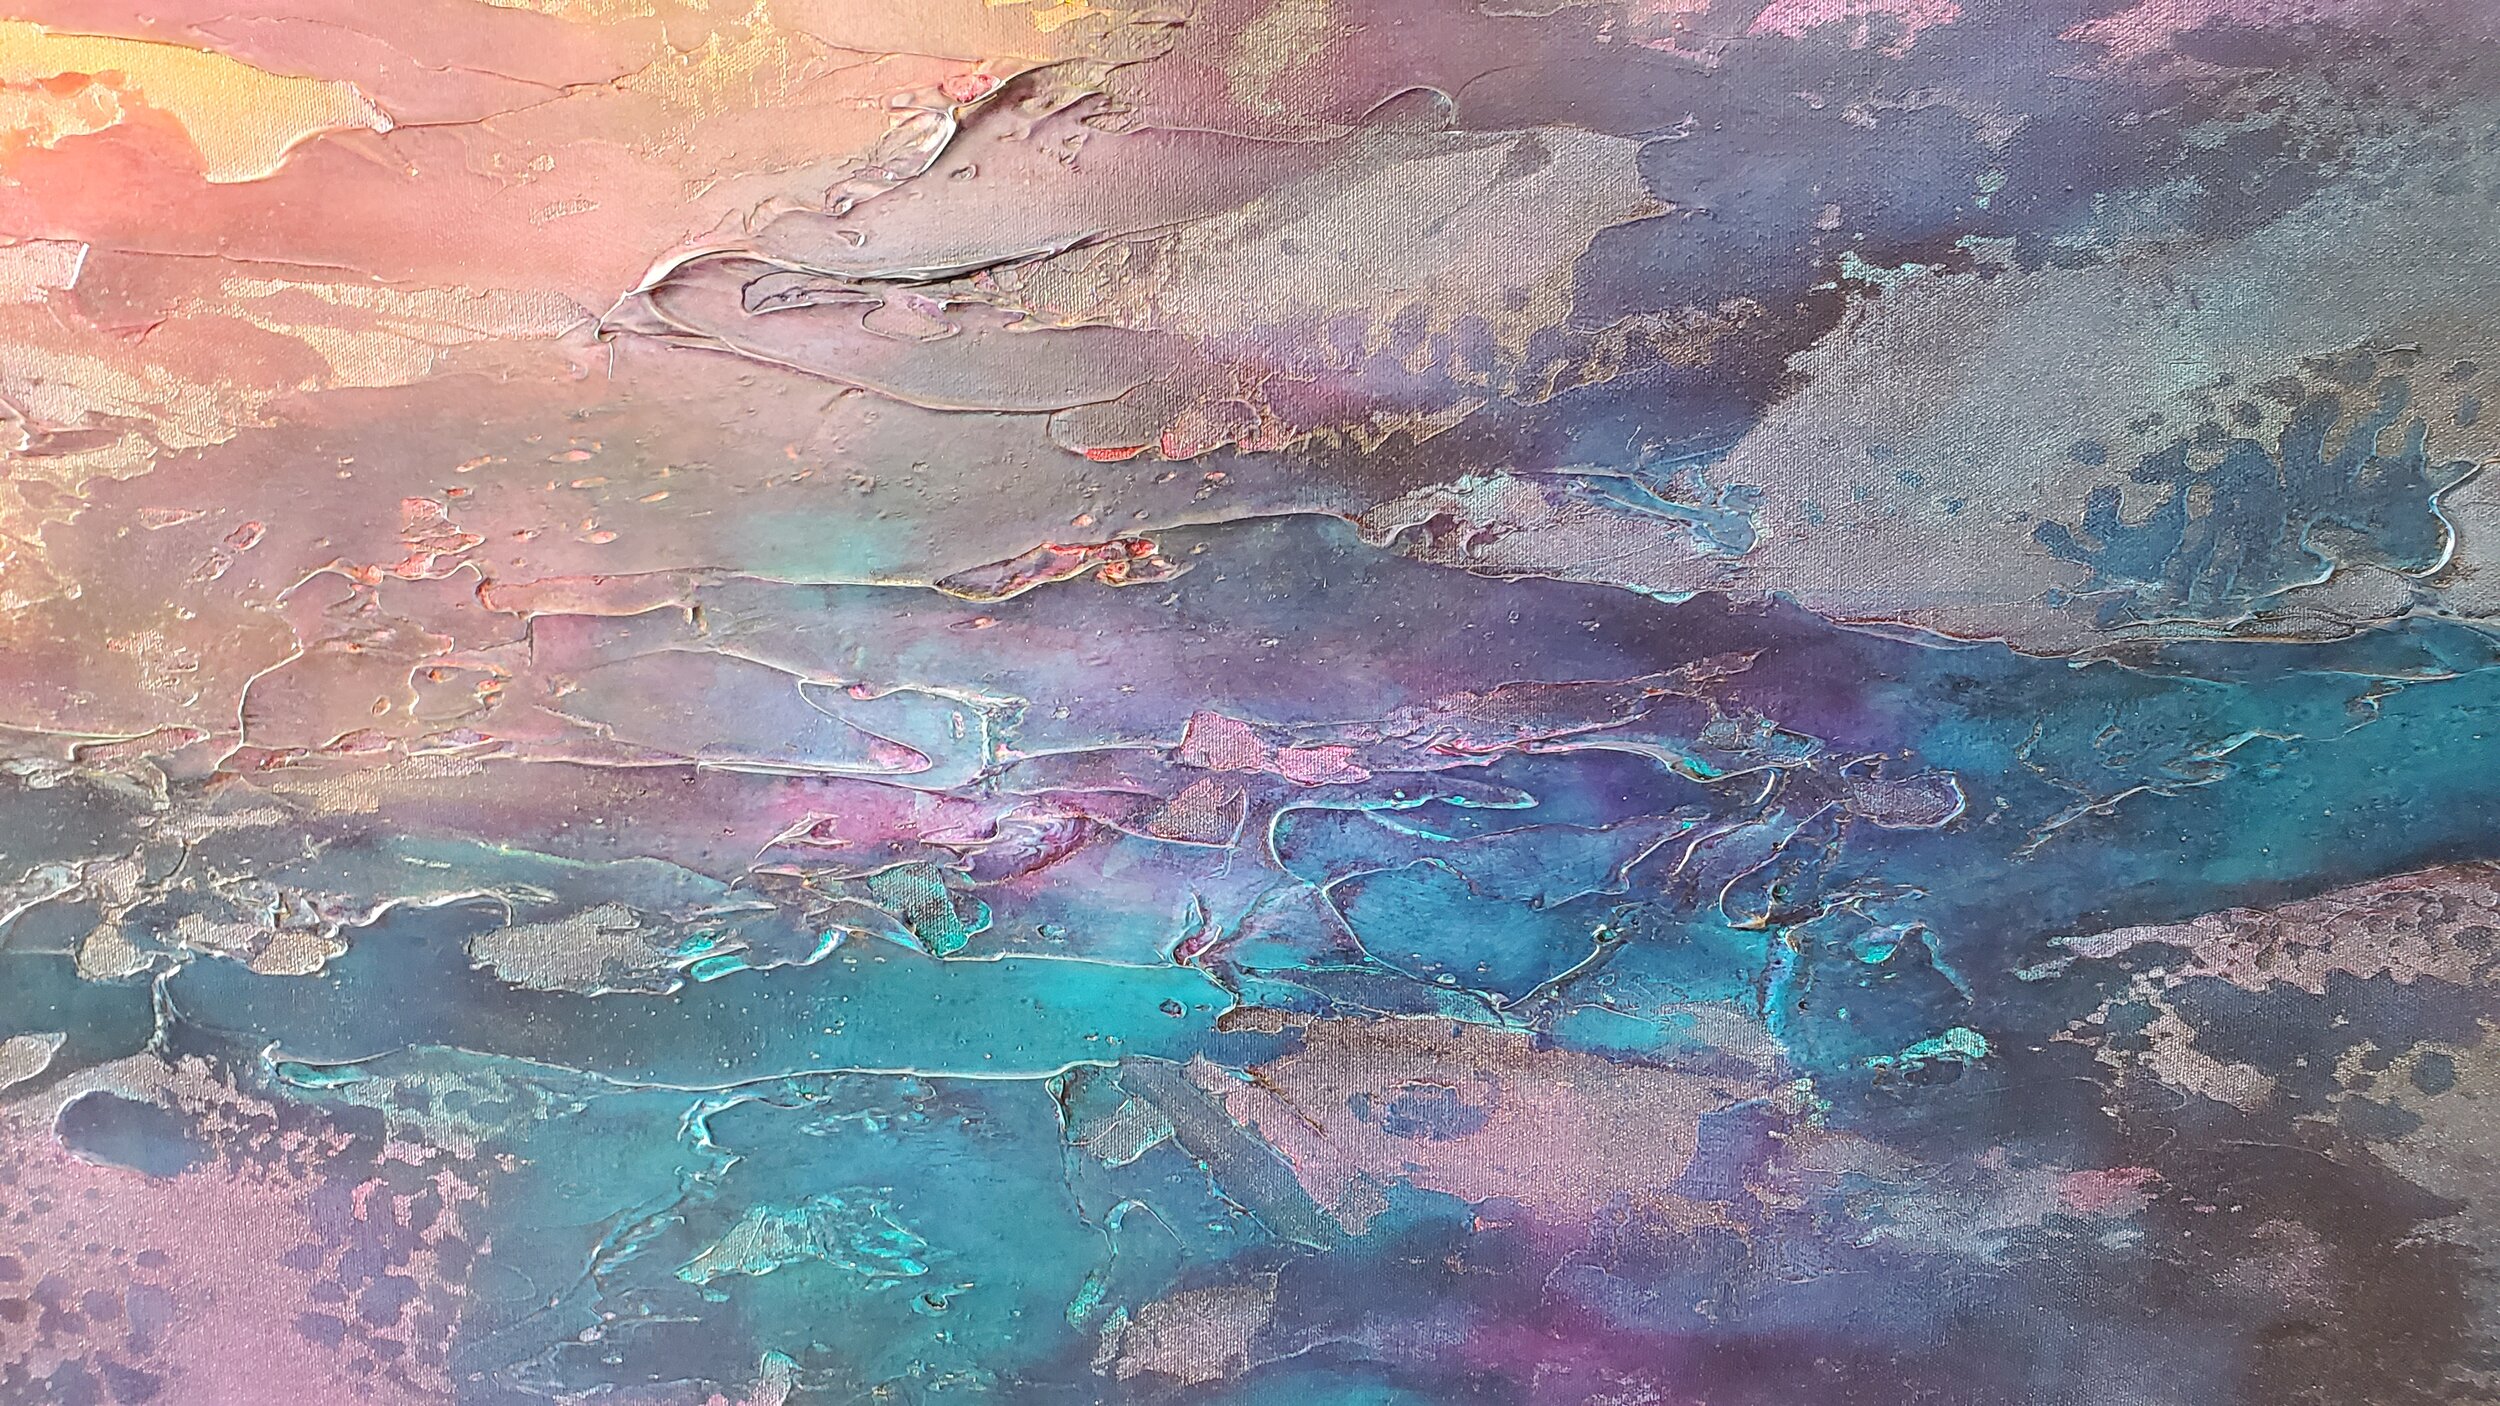  Painting #10 Rise- Vancouver abstract painter, Donna Giraud has eleven new available artworks for sale in her 2020 solo art exhibition titled, Lost and Found. Her large scale, abstract, textural artworks are perfect for any interior design aesthetic